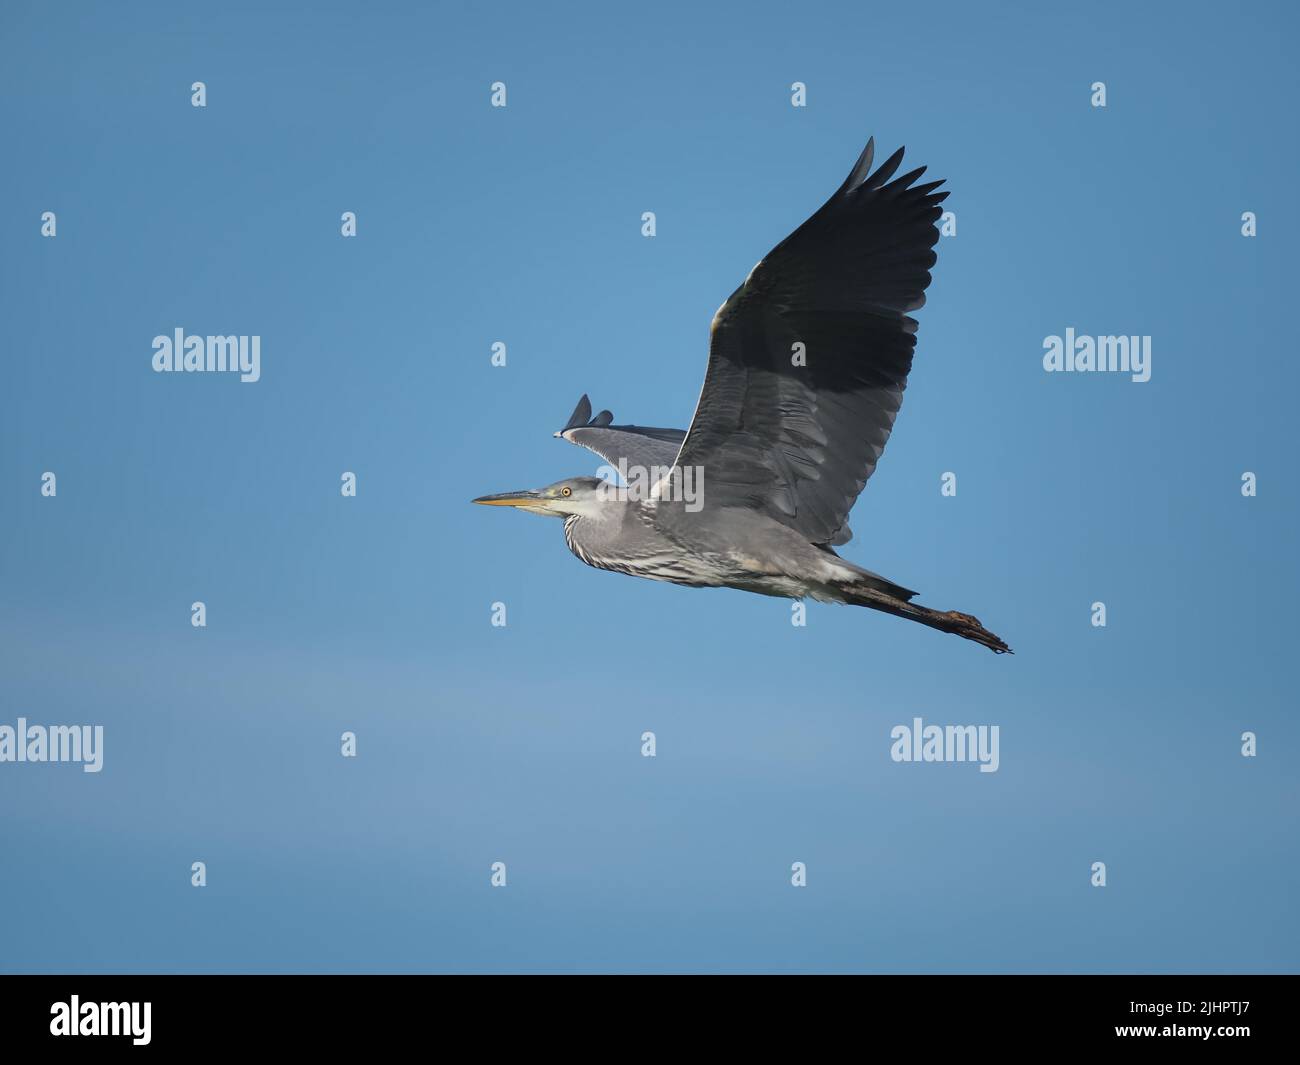 Many heron species are now breeding on the Wirral, Cheshire, England  including grey heron. Stock Photo